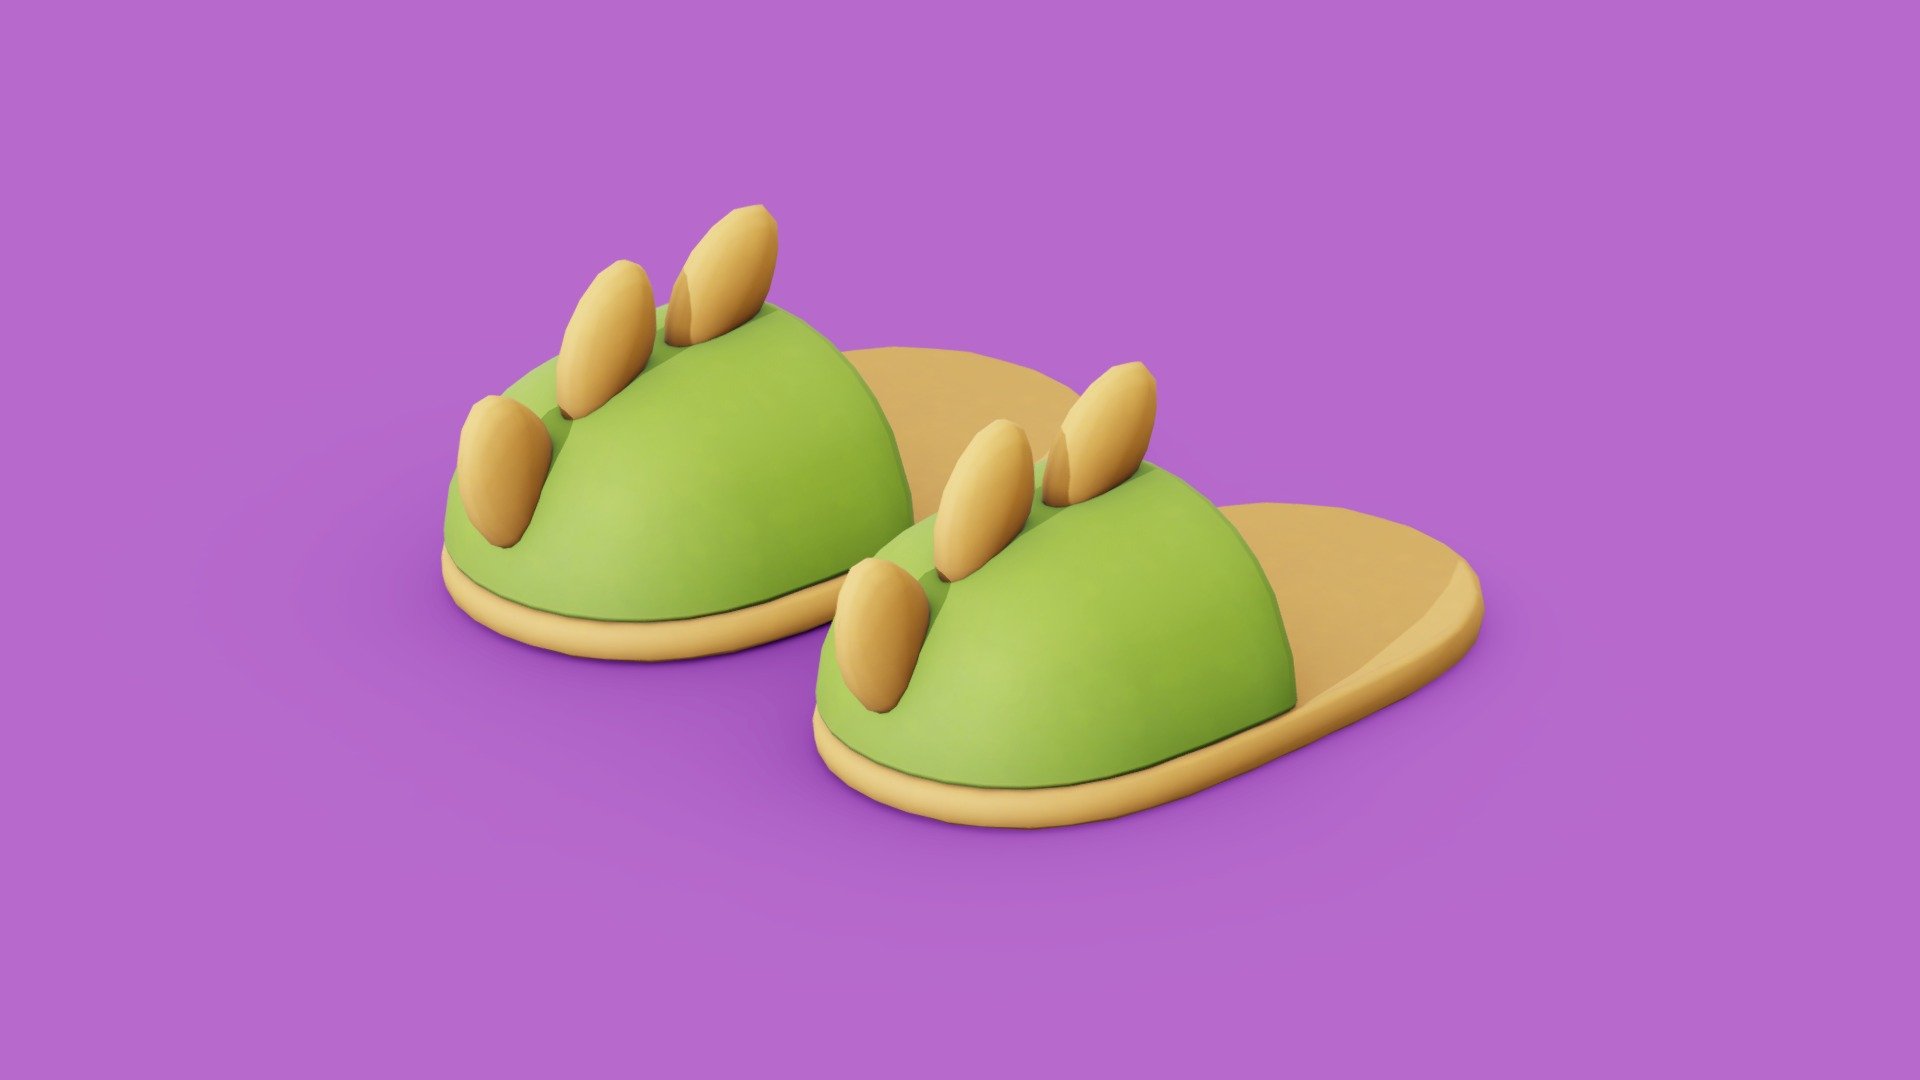 Dino Slipper for your renders and games

Textures:

Diffuse color, Roughness, AO

All textures are 2K

Files Formats:

Blend

Fbx

Obj - Dino Slipper - Buy Royalty Free 3D model by Vanessa Araújo (@vanessa3d) 3d model